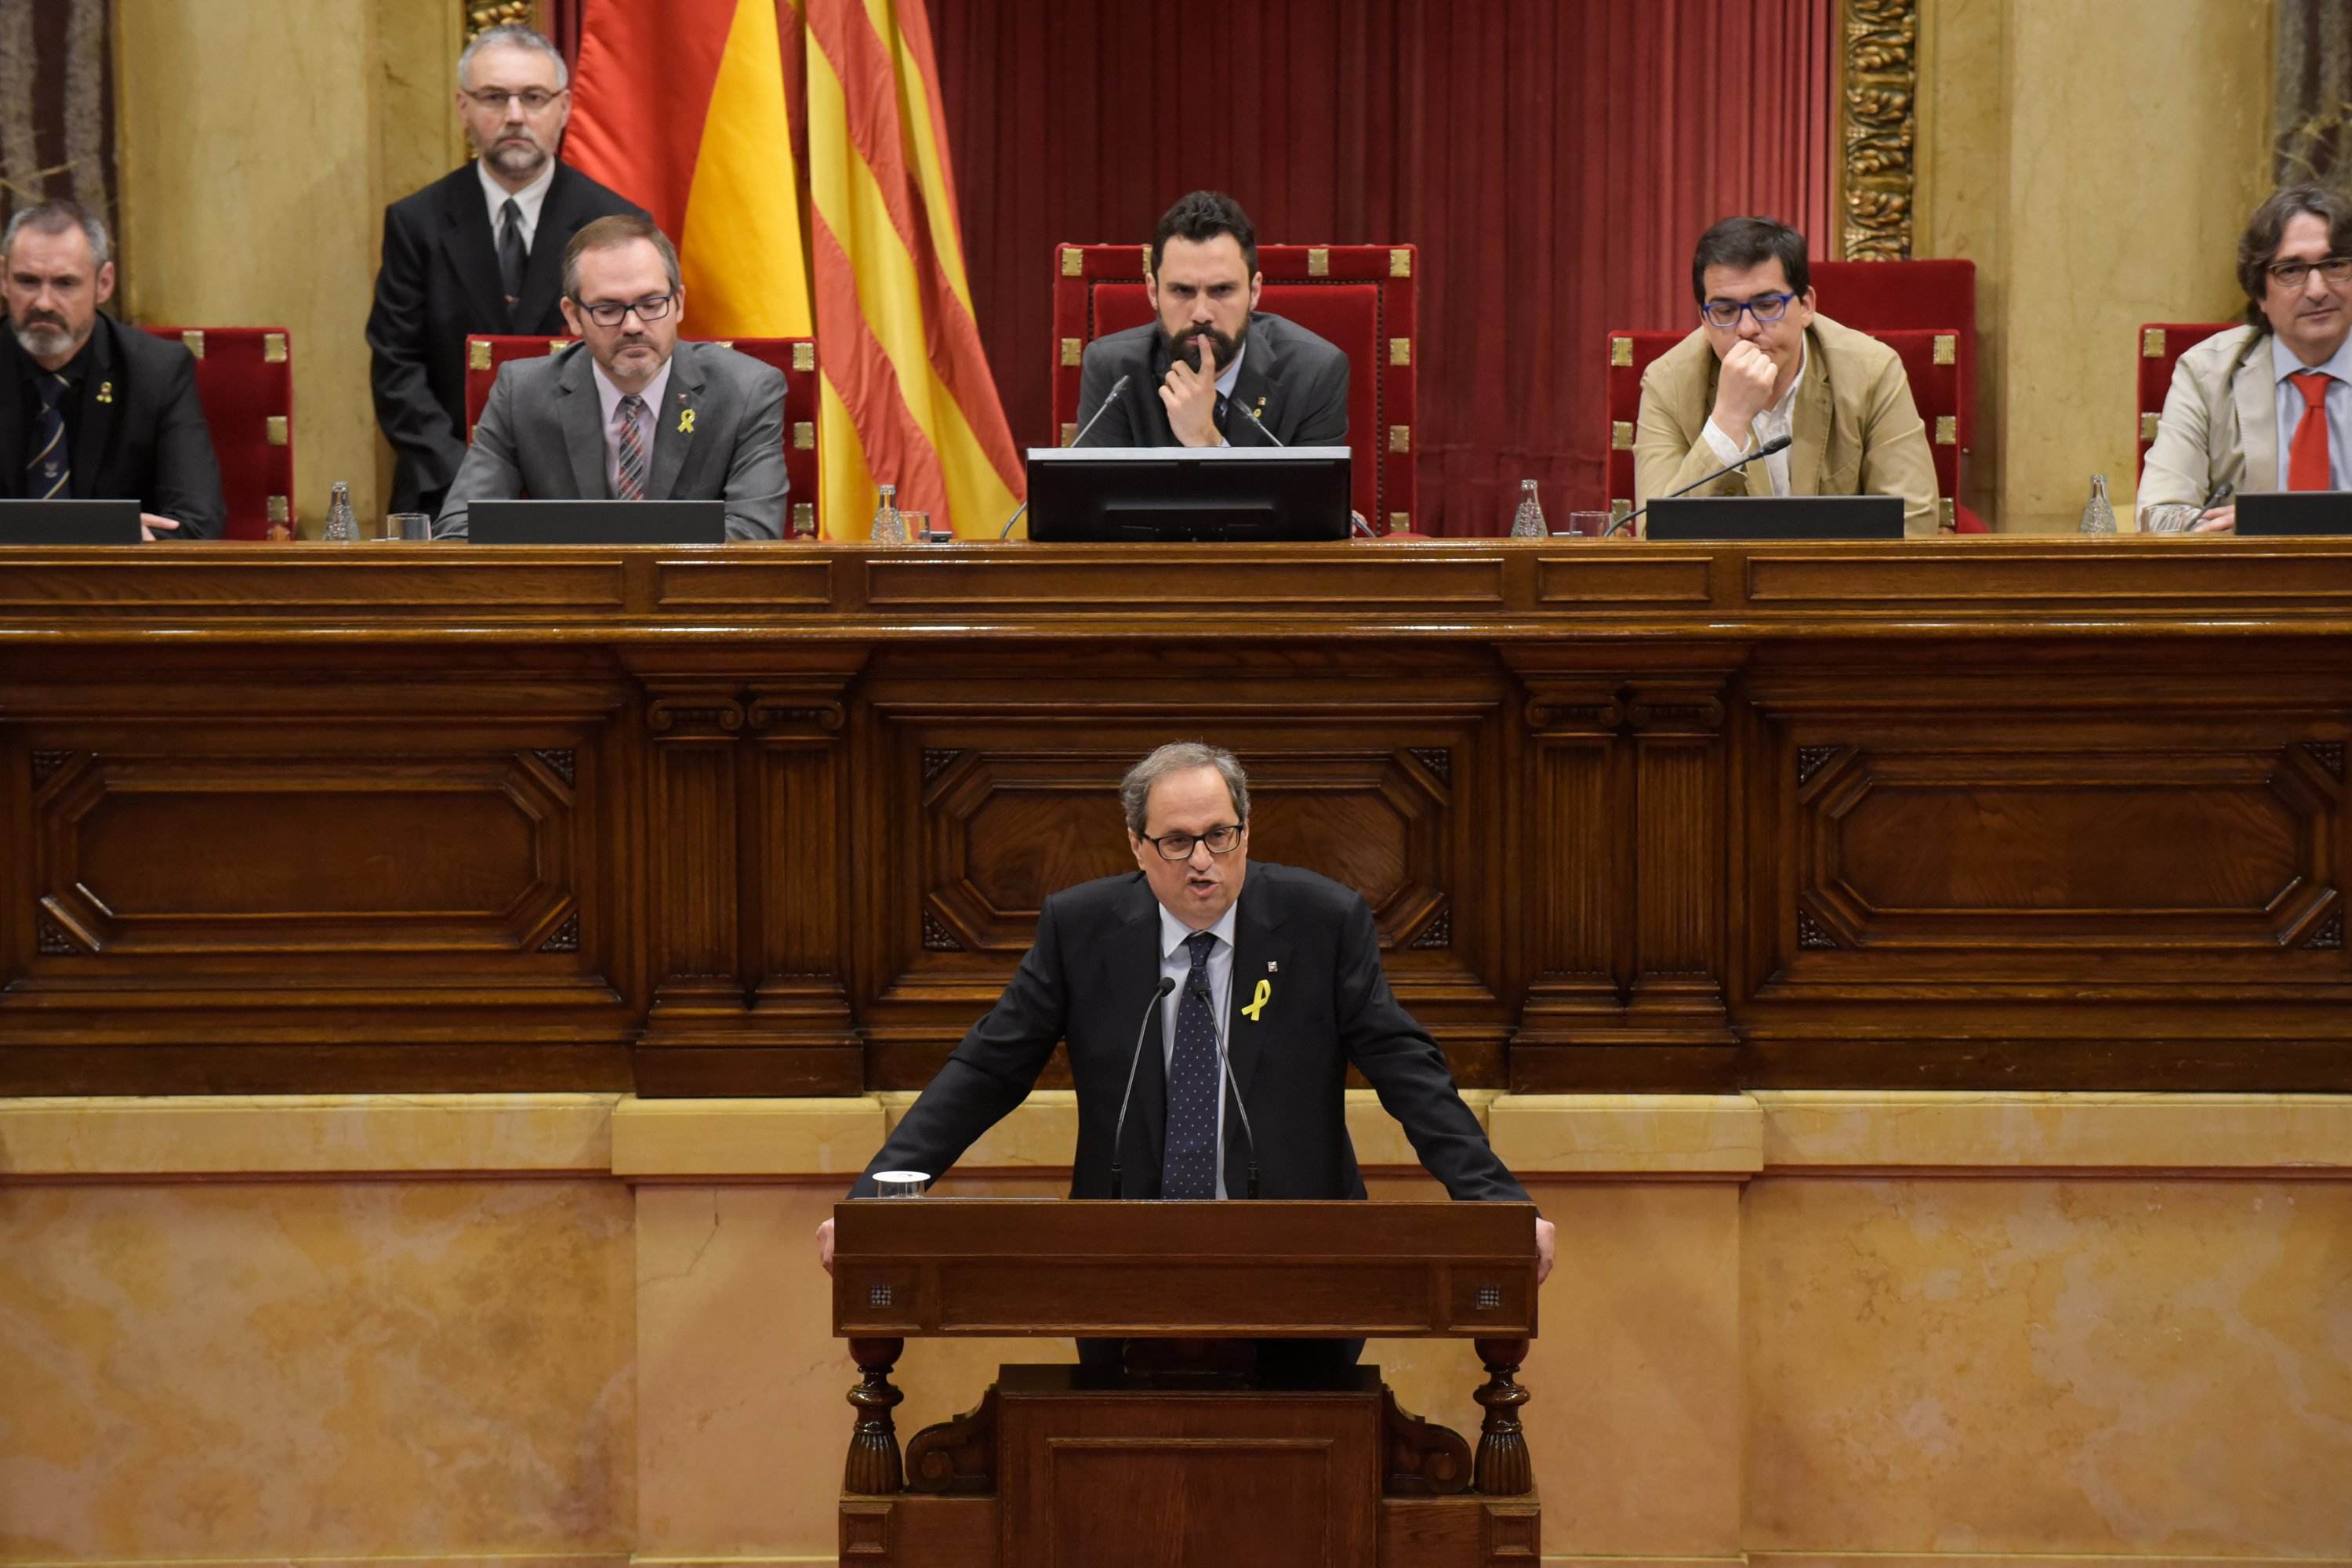 "Shall we talk, Mr Rajoy?" - 10 phrases from Catalan candidate Quim Torra's speech